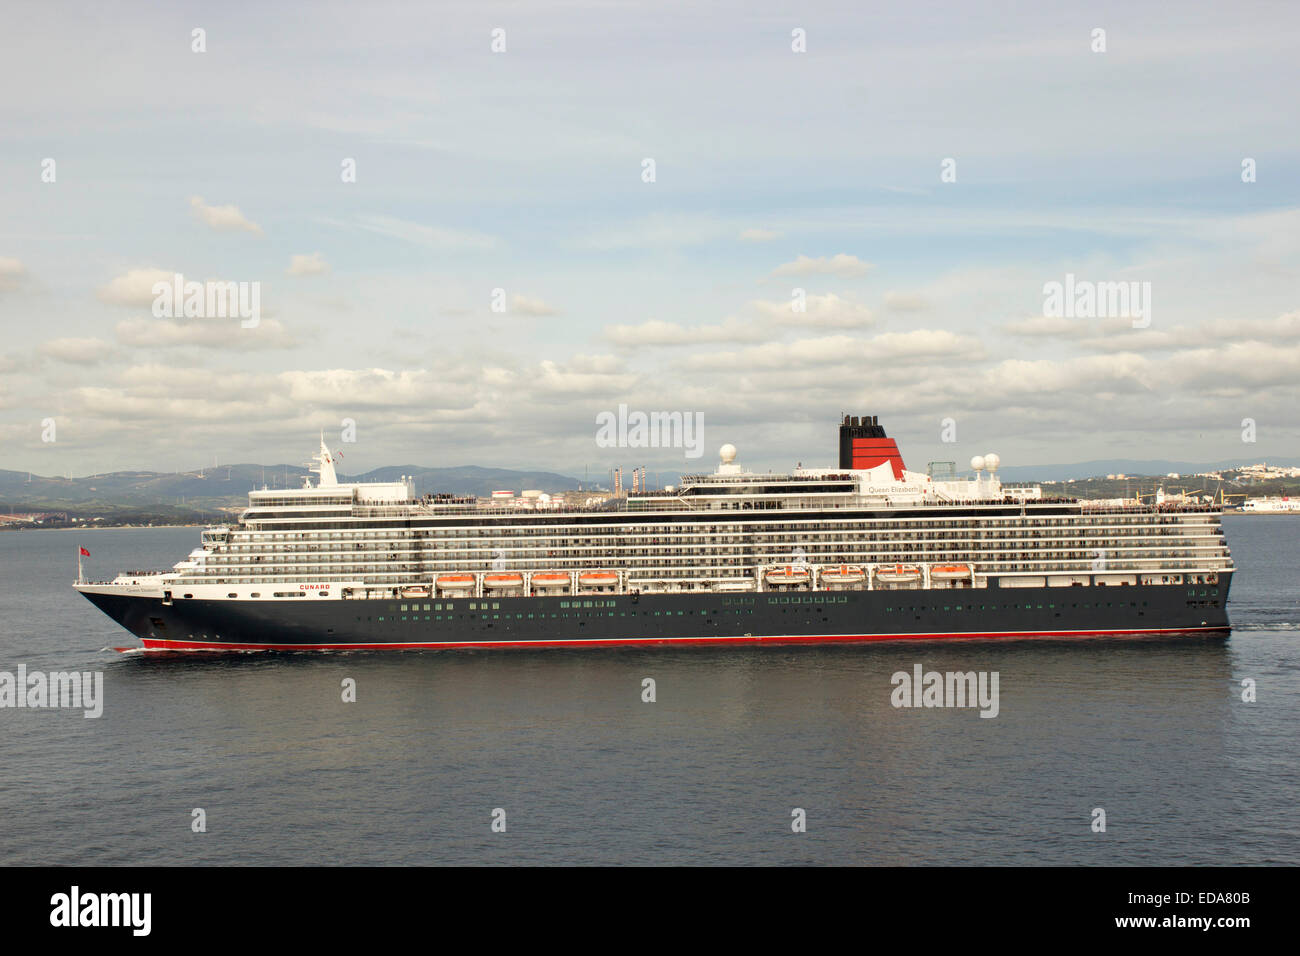 MS Queen Victoria (QV) cruise ship operated by the Cunard Line Vista-class cruise ships in St Petersburg, Russia Stock Photo